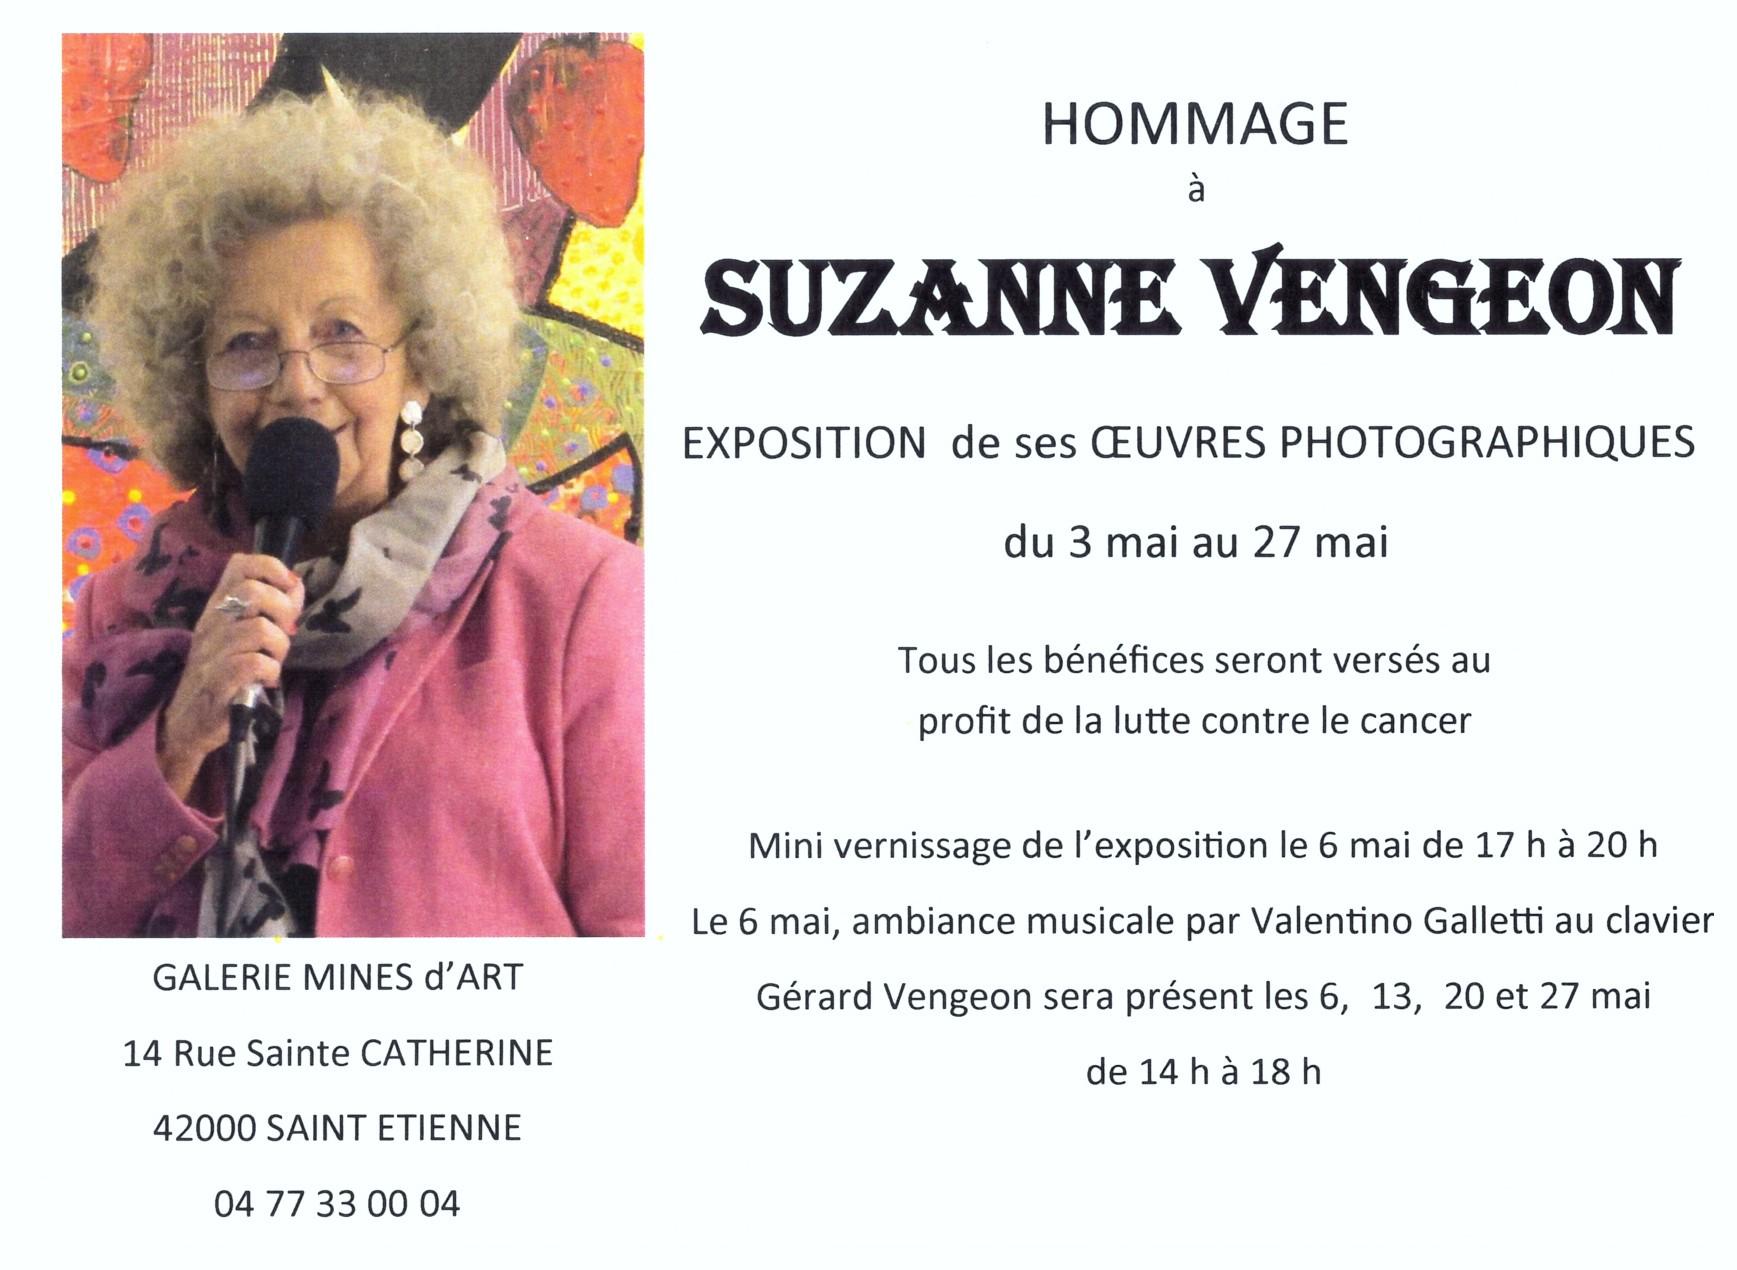 Exposition hommage suzanne vengeon